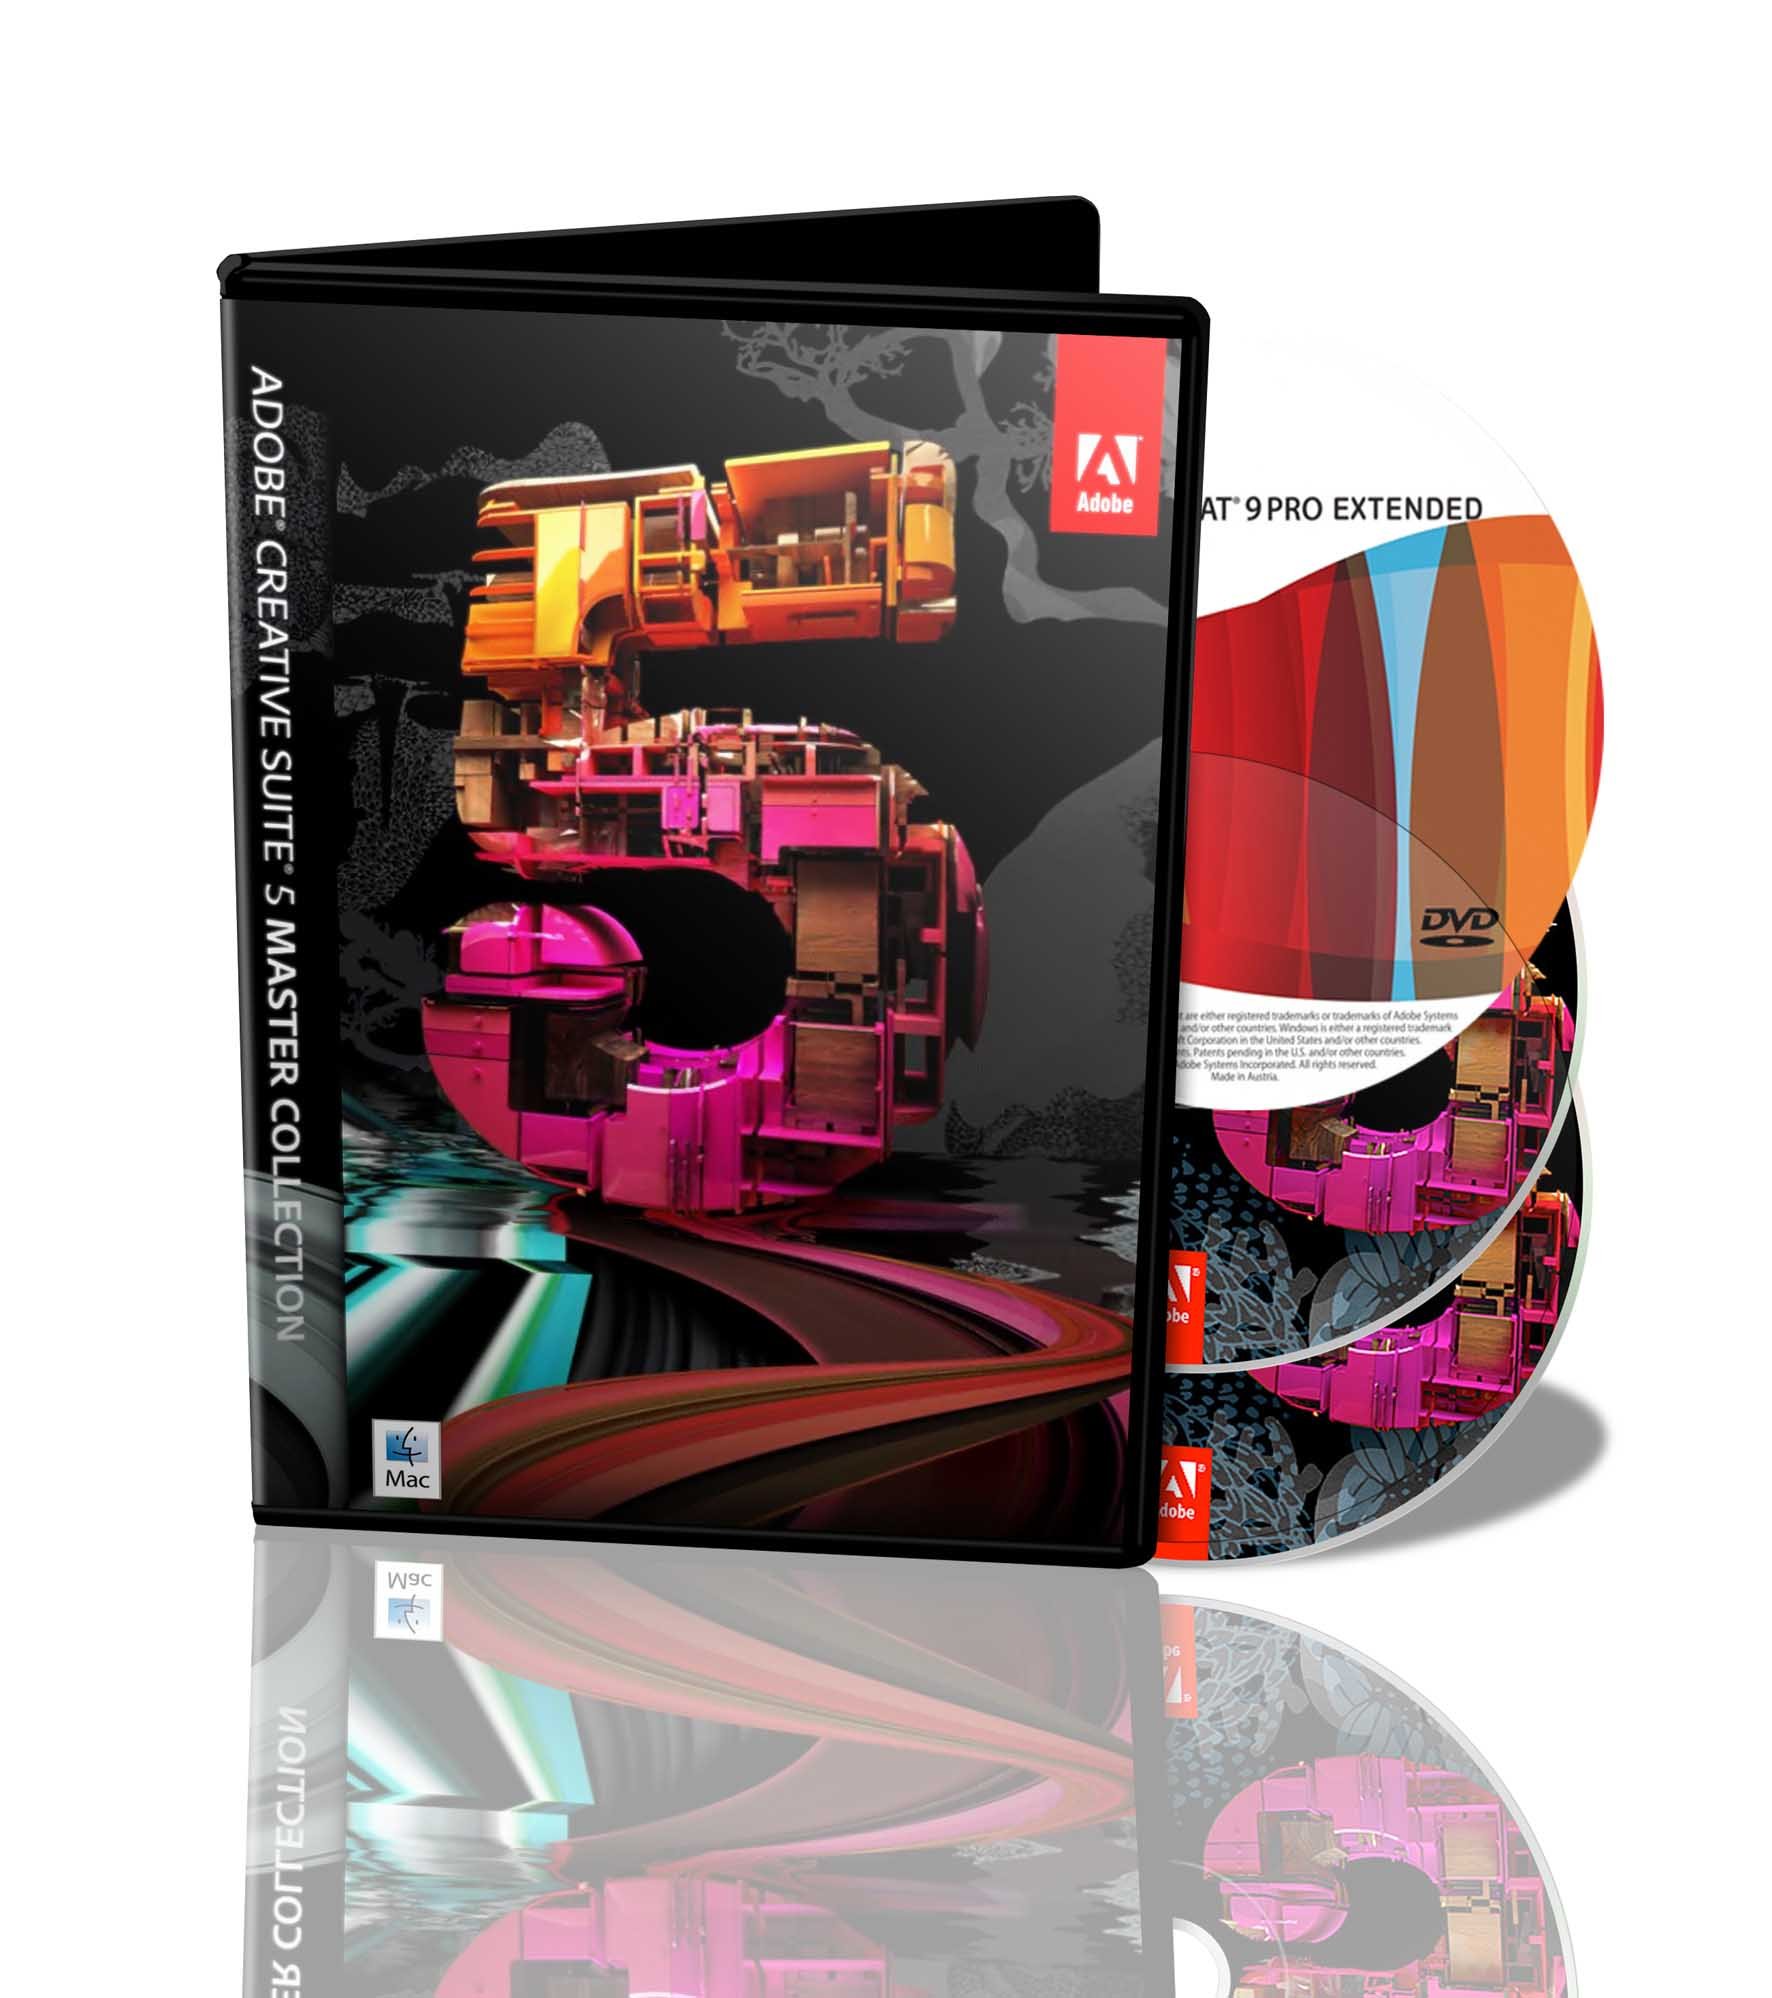 adobe master collection price